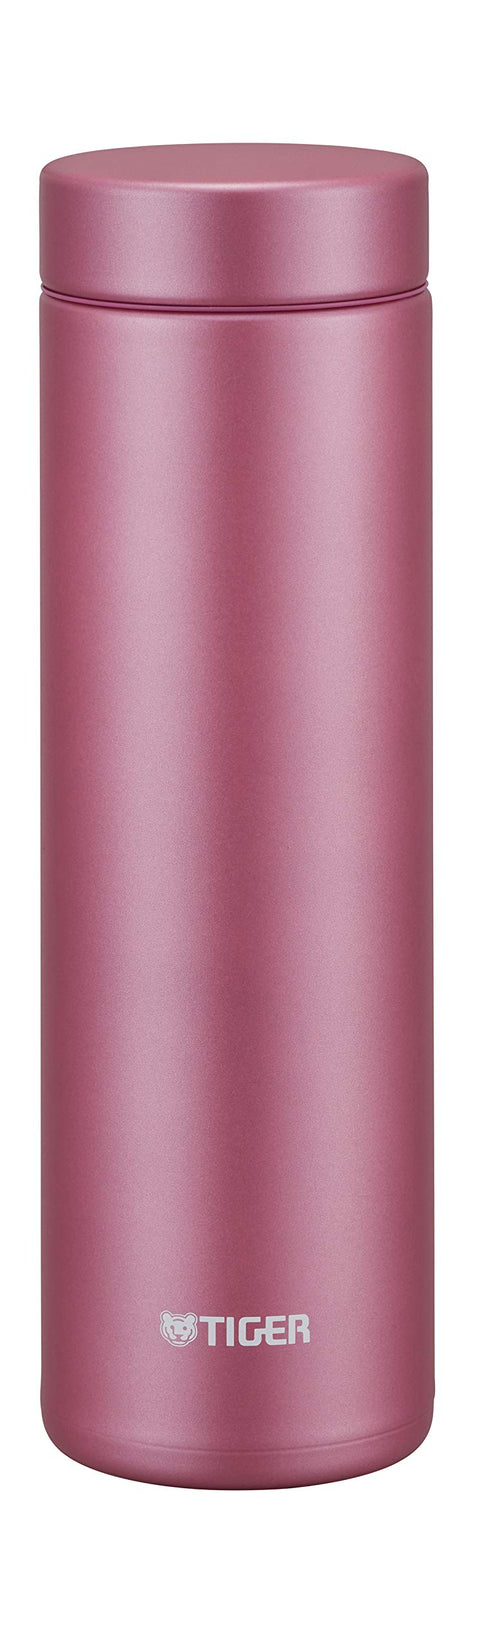 Tiger Thermos (Tiger) Mug Bottle, Frost Pink, 500Ml Mmz-A502Kg